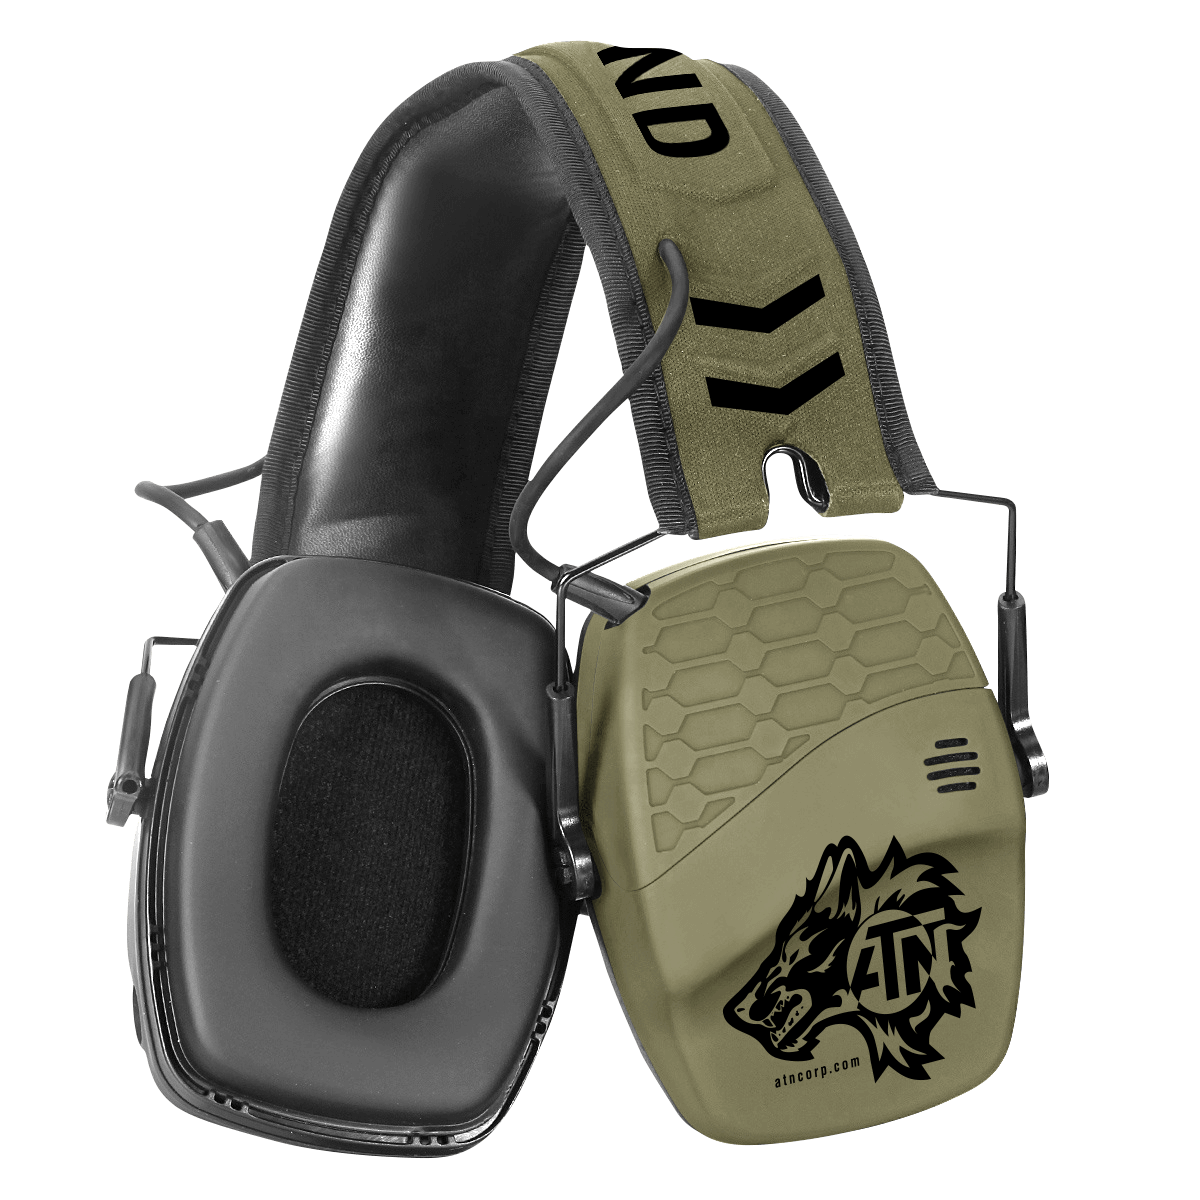 Meet the new X-Sound Shooting Earmuffs from ATN Corp